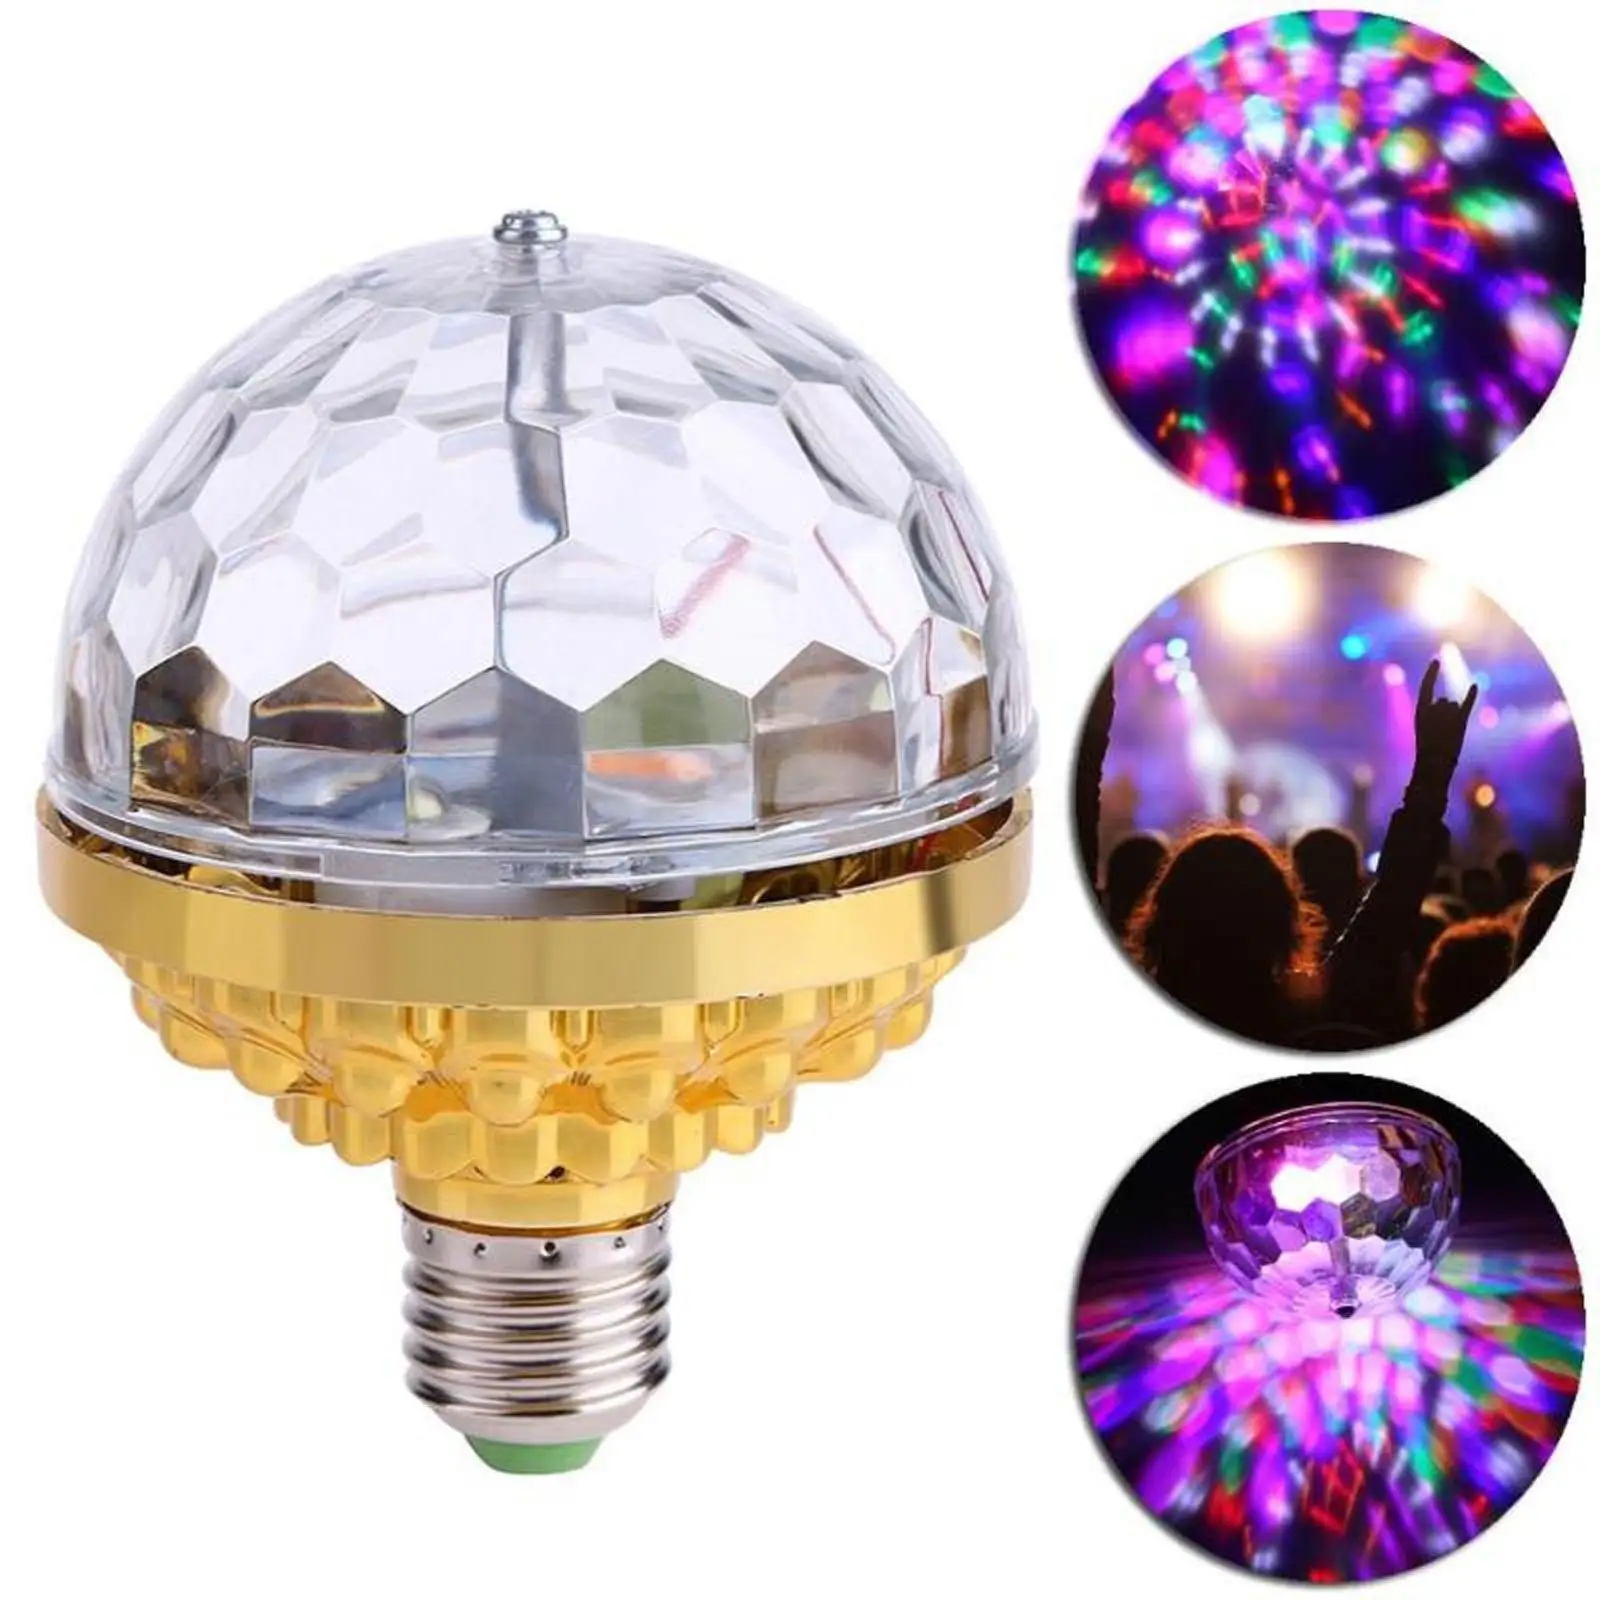 

Colorful Auto Rotating Stage Disco Light 6W LED Bulb RGB Magic Crystal Ball Lamp Bar KTV Dance Party Atmosphere Light Decoation